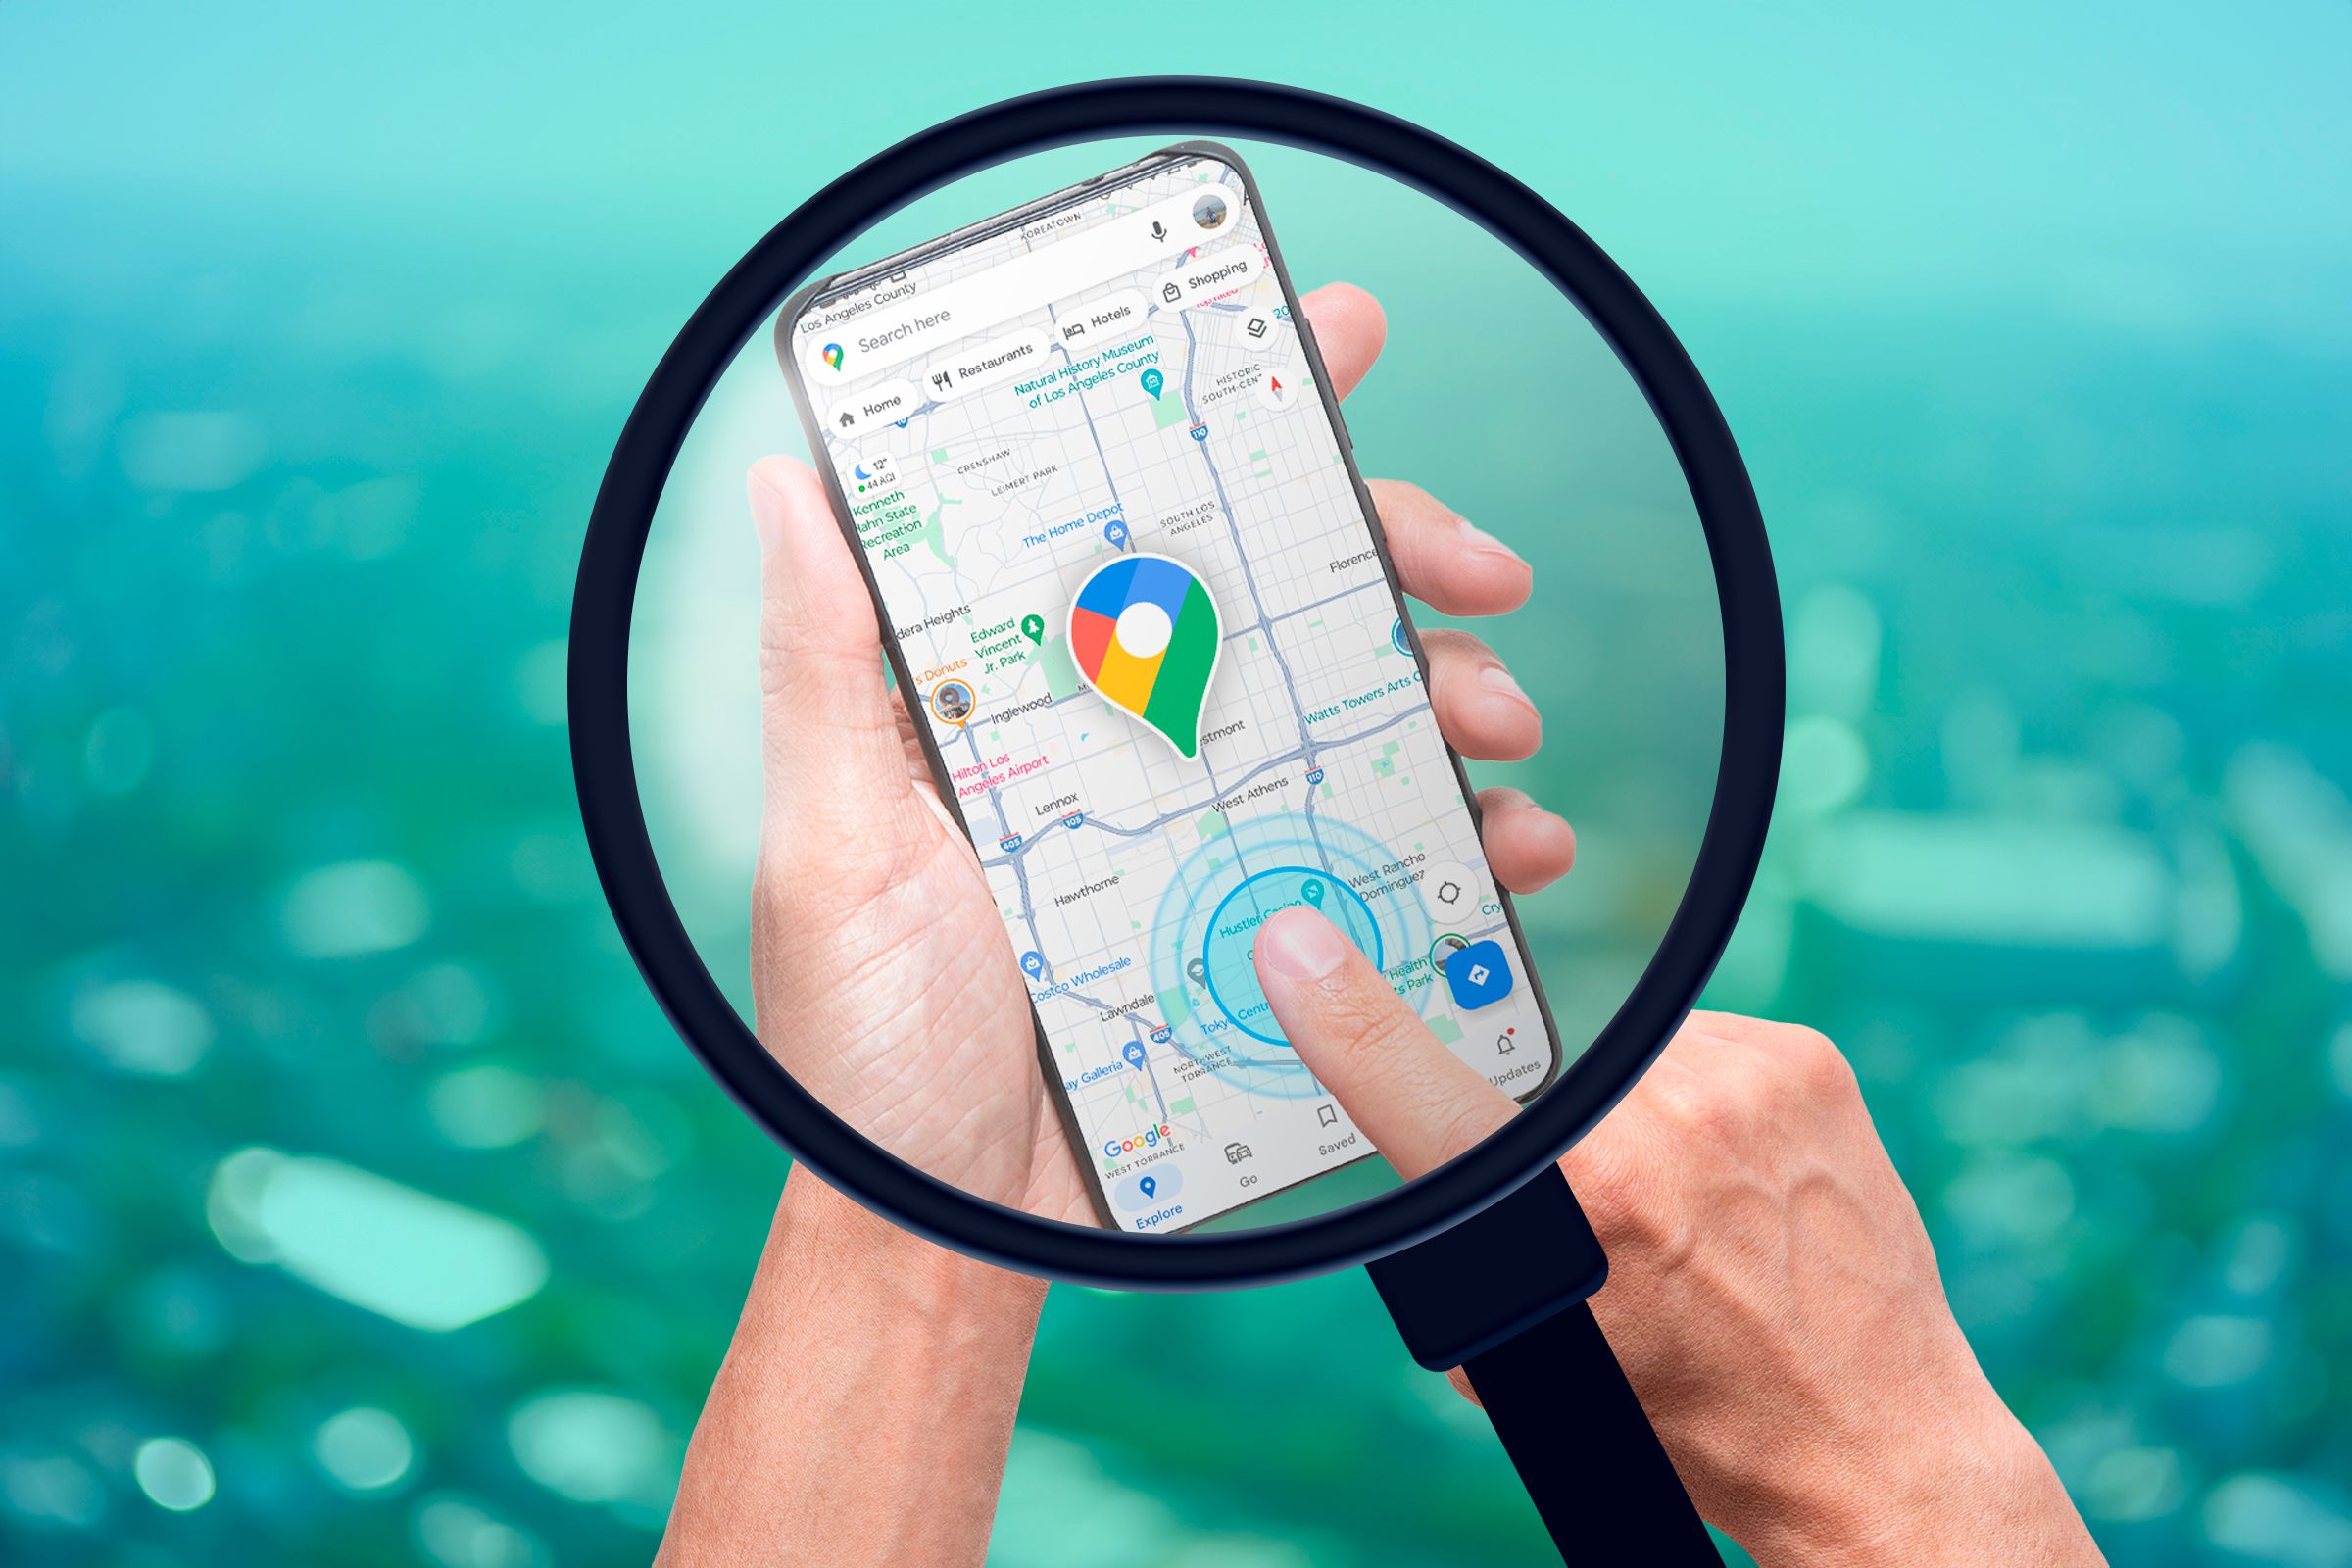 A magnifying glass showing a smartphone with Google Maps open and a person's finger pointing towards the screen.